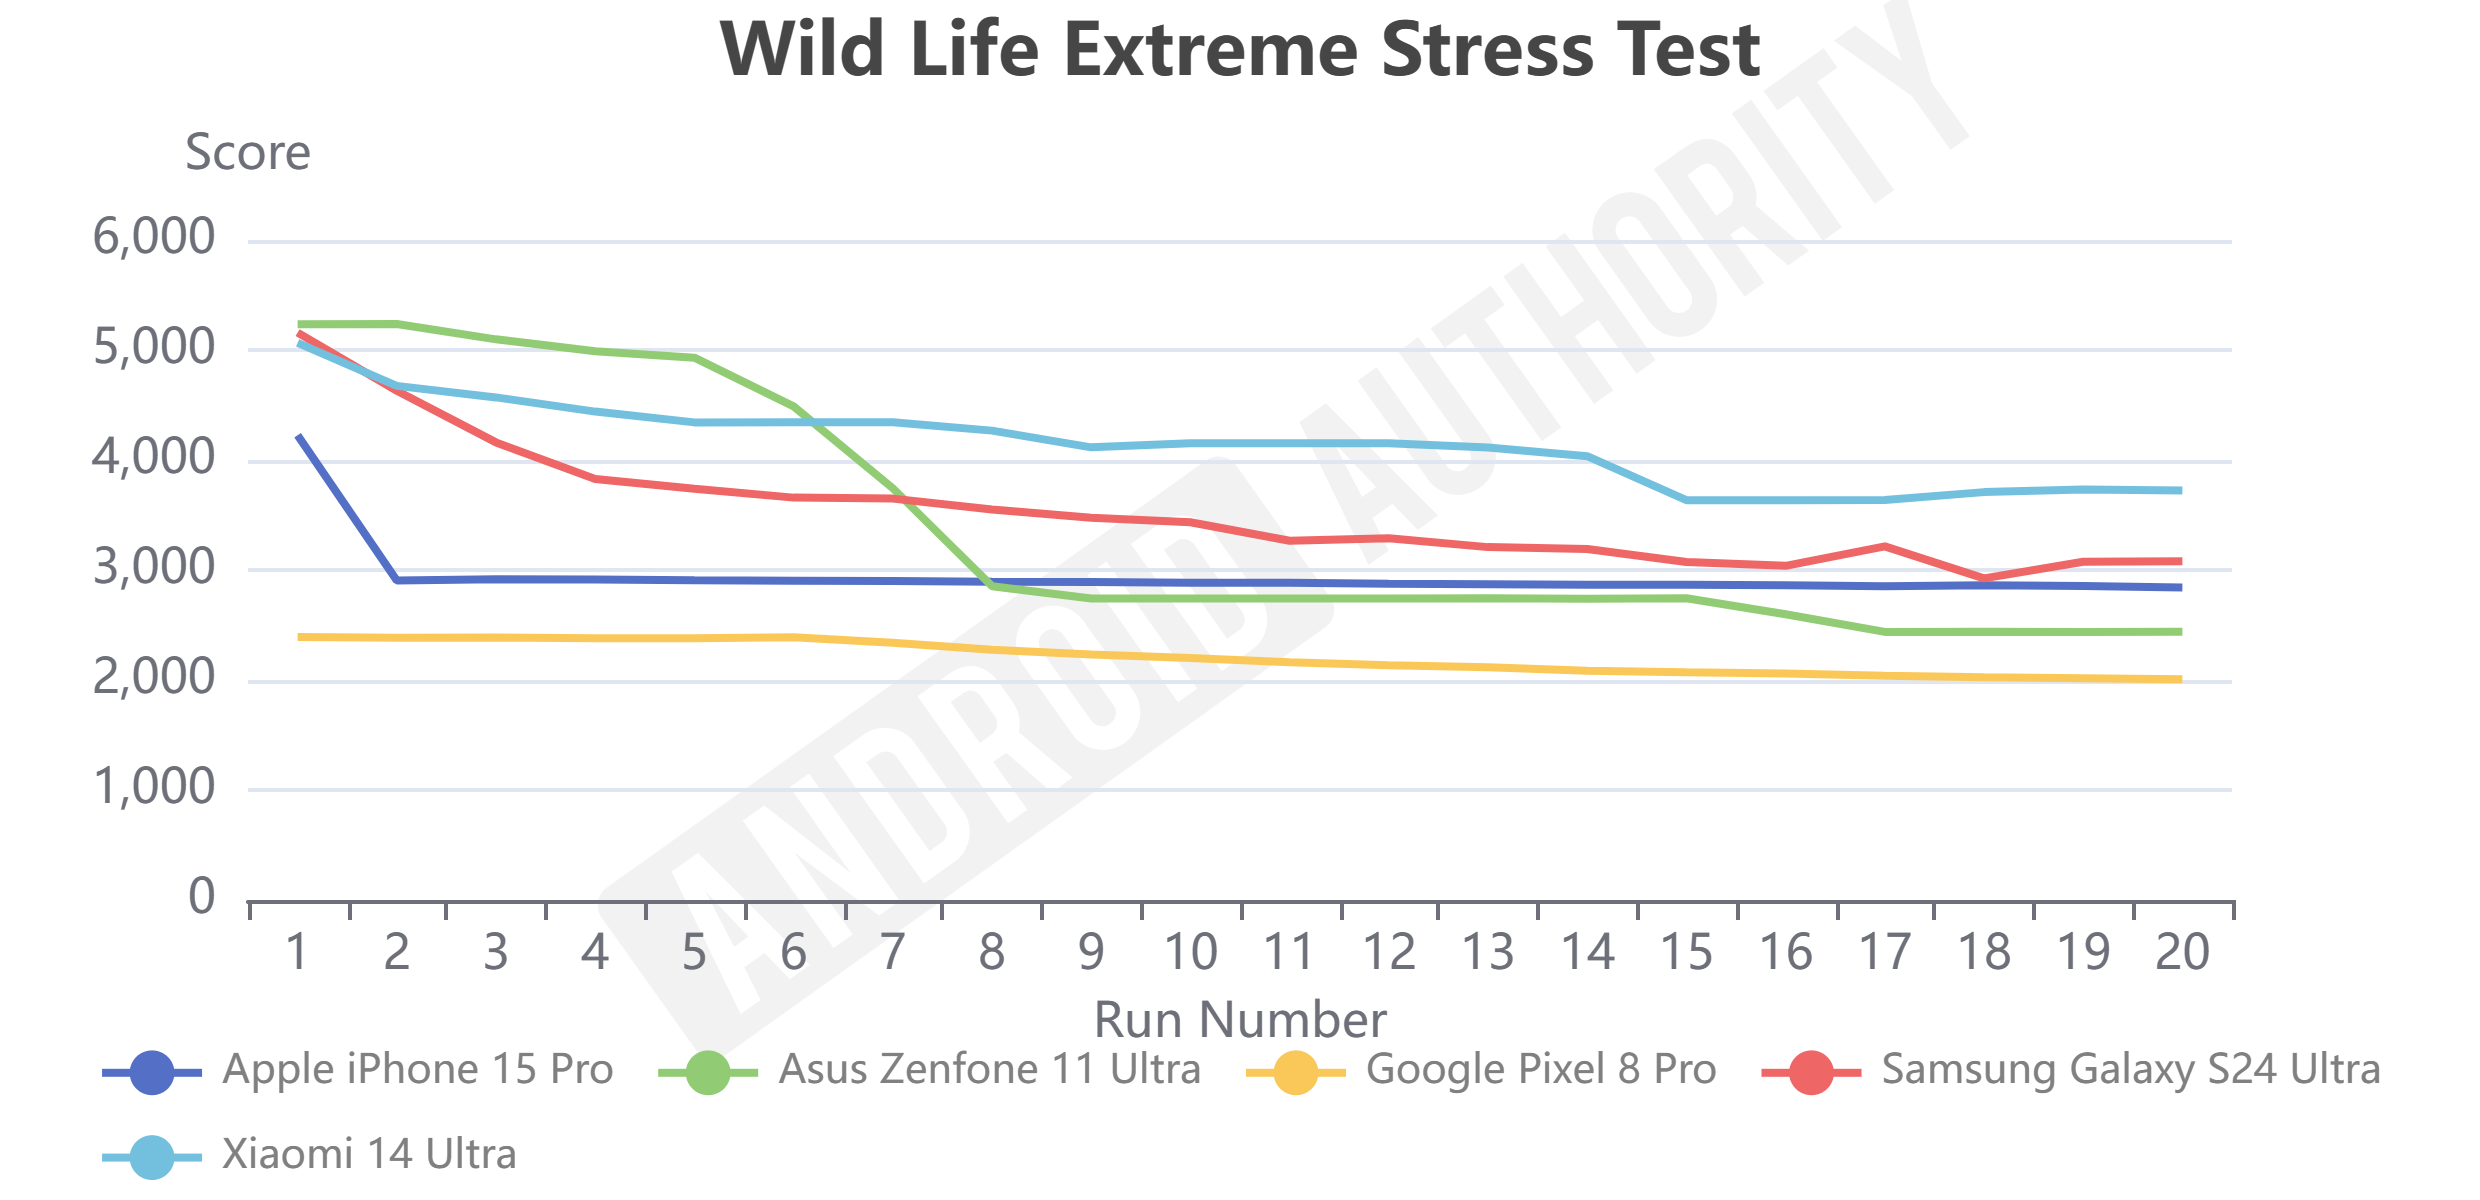 Xiaomi 14 Ultra Wild Life Extreme Stress Test Results